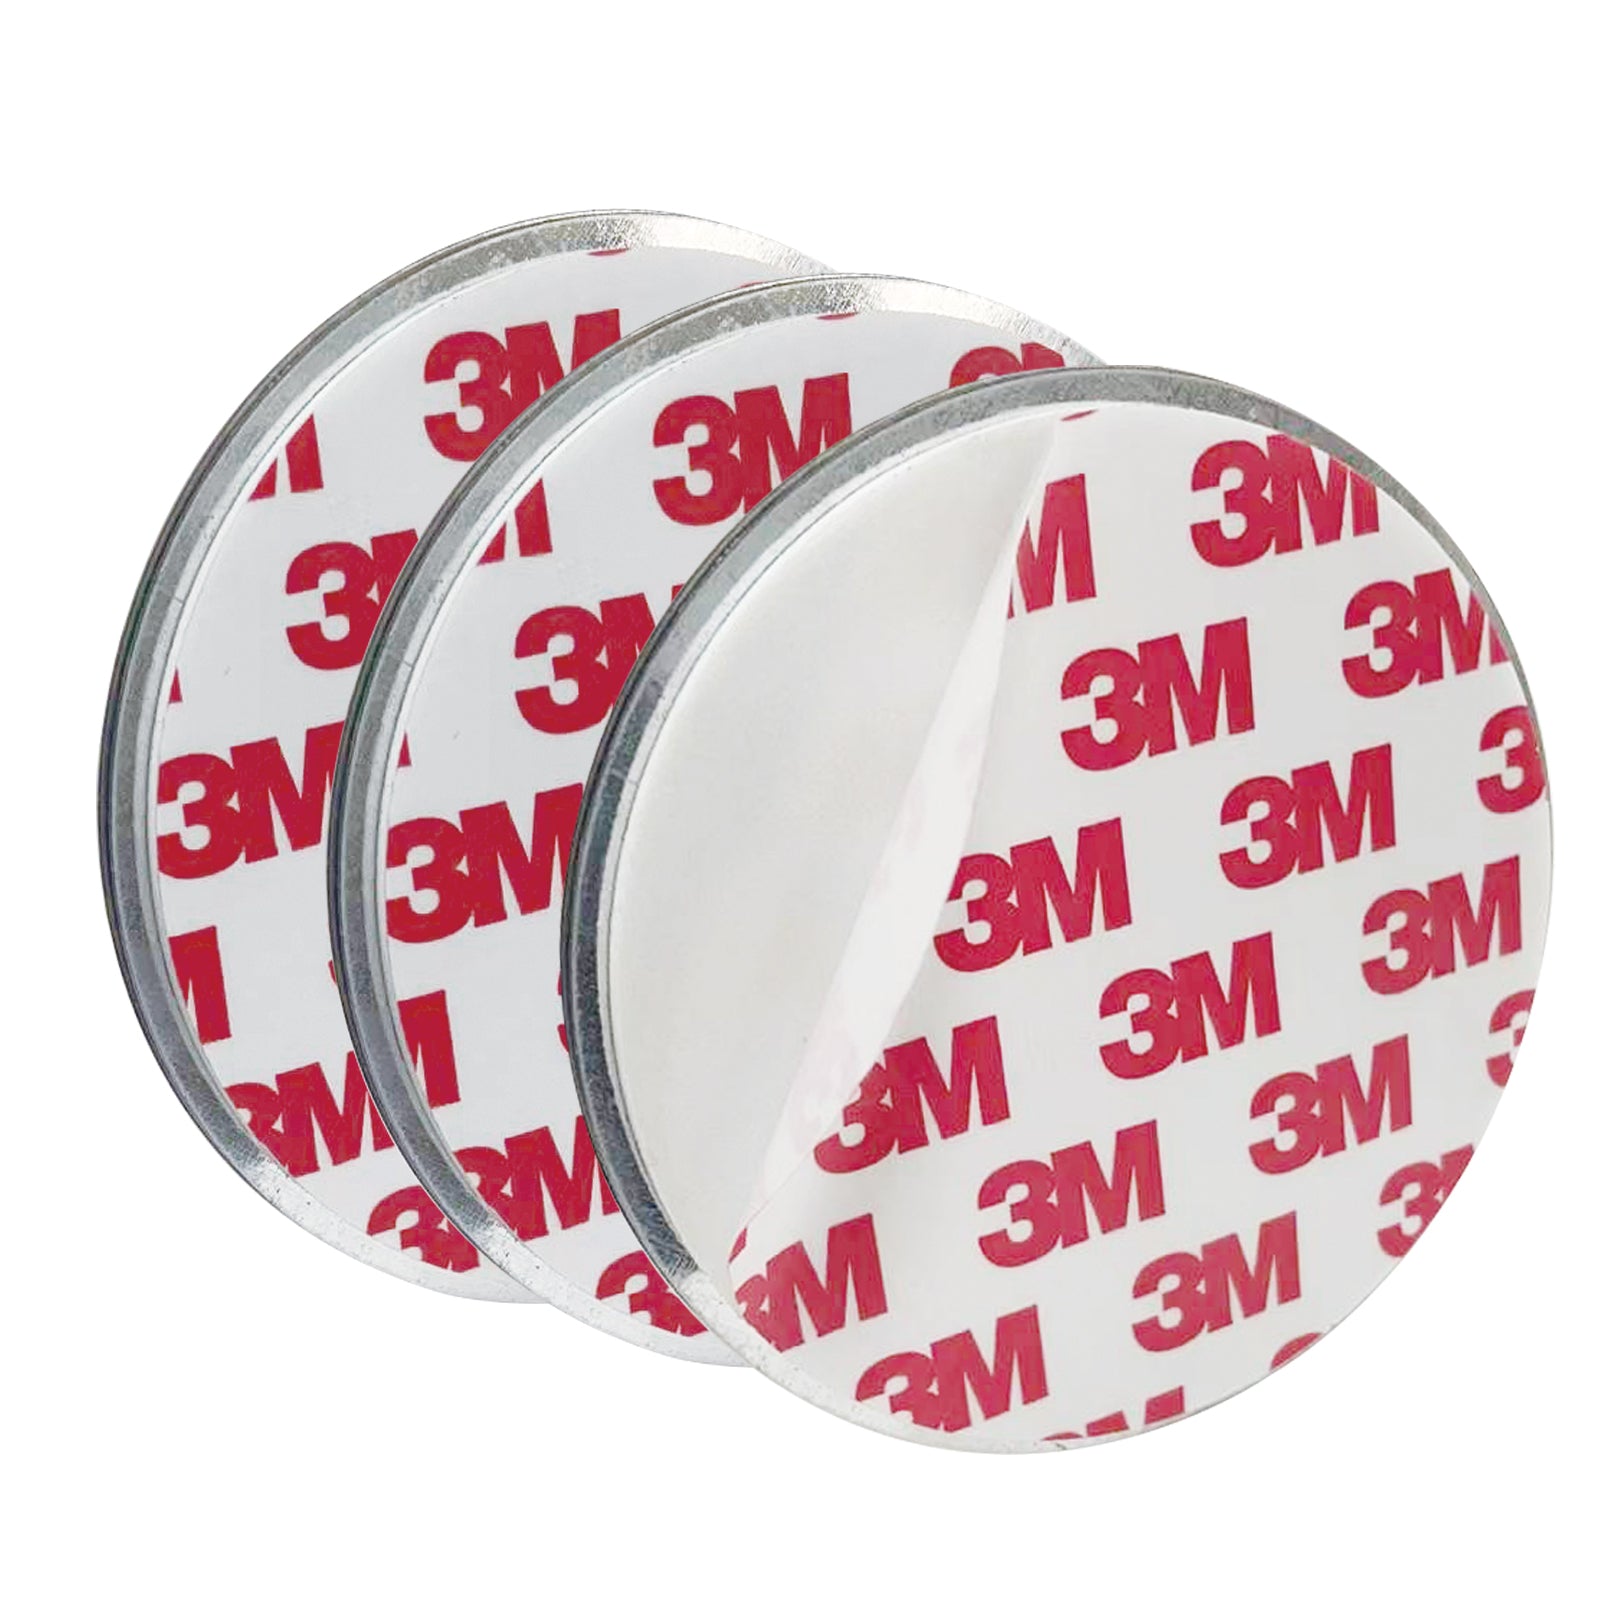 DVM-SA30MR-3: Set of 3 advanced smoke detectors DVM-SA30MR, fixed battery, wireless interconnection, magnetic mounting